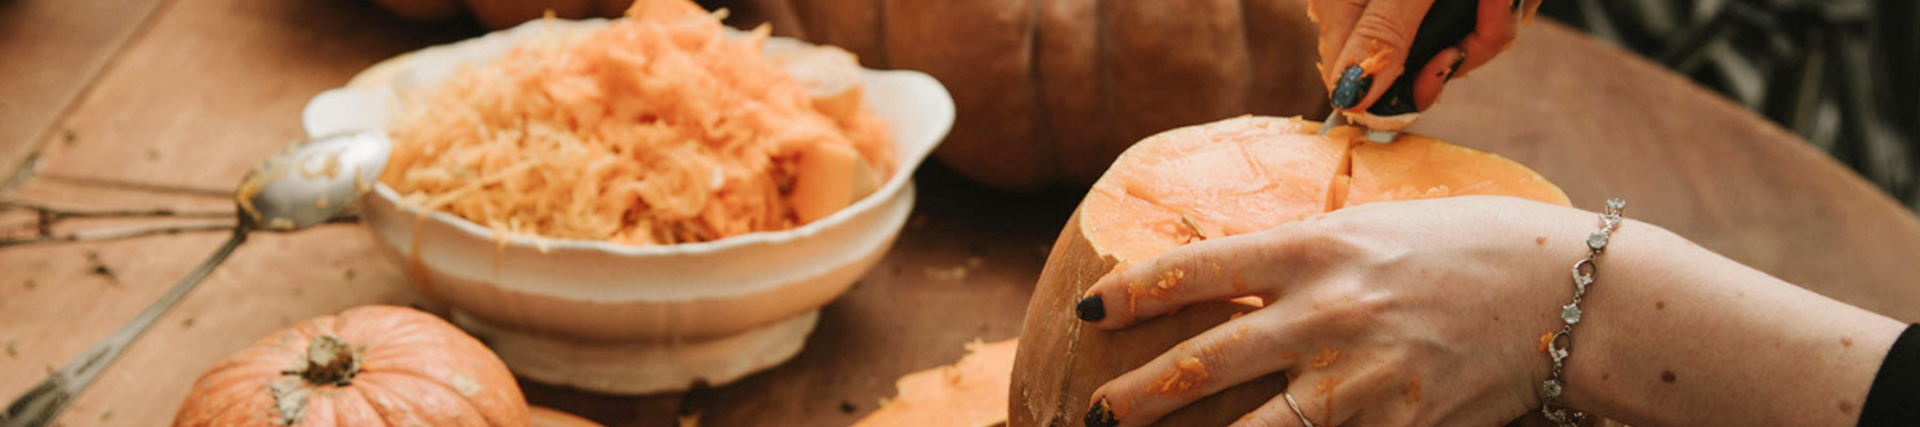 A photo of two people's hands cutting and gutting a couple of different sized orange pumpkins on a brown surface. A bowl of pumpkin flesh is also on the table.